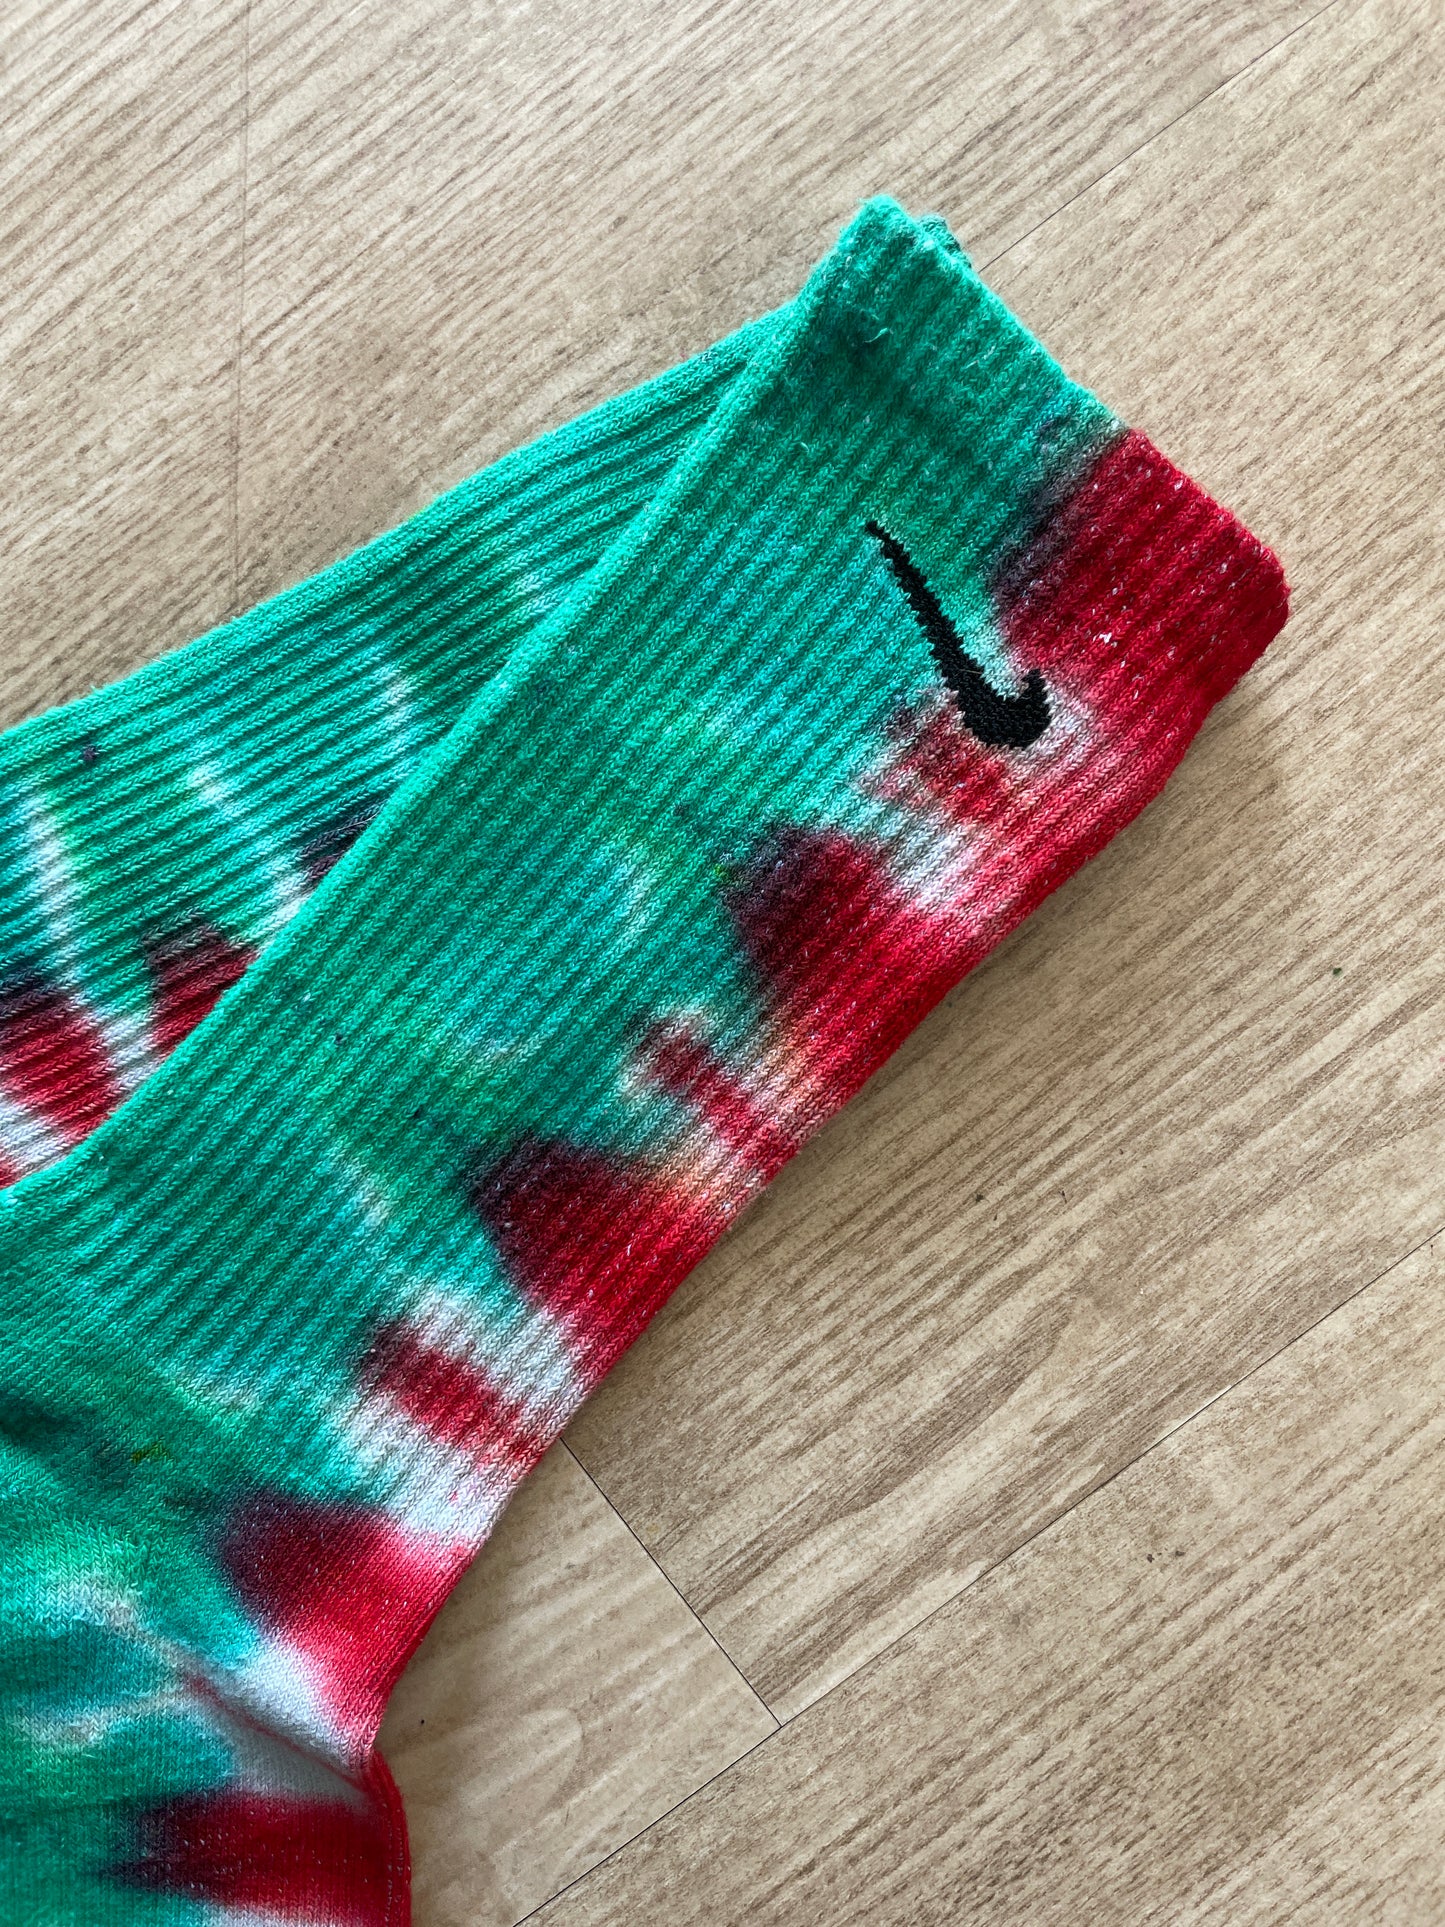 NIKE Christmas Socks Hand Tie Dyed Red and Green Nike Dri-FIT Everyday Plus Crew Training Socks - Size Large (Men's 8-12/Women's 10-13)